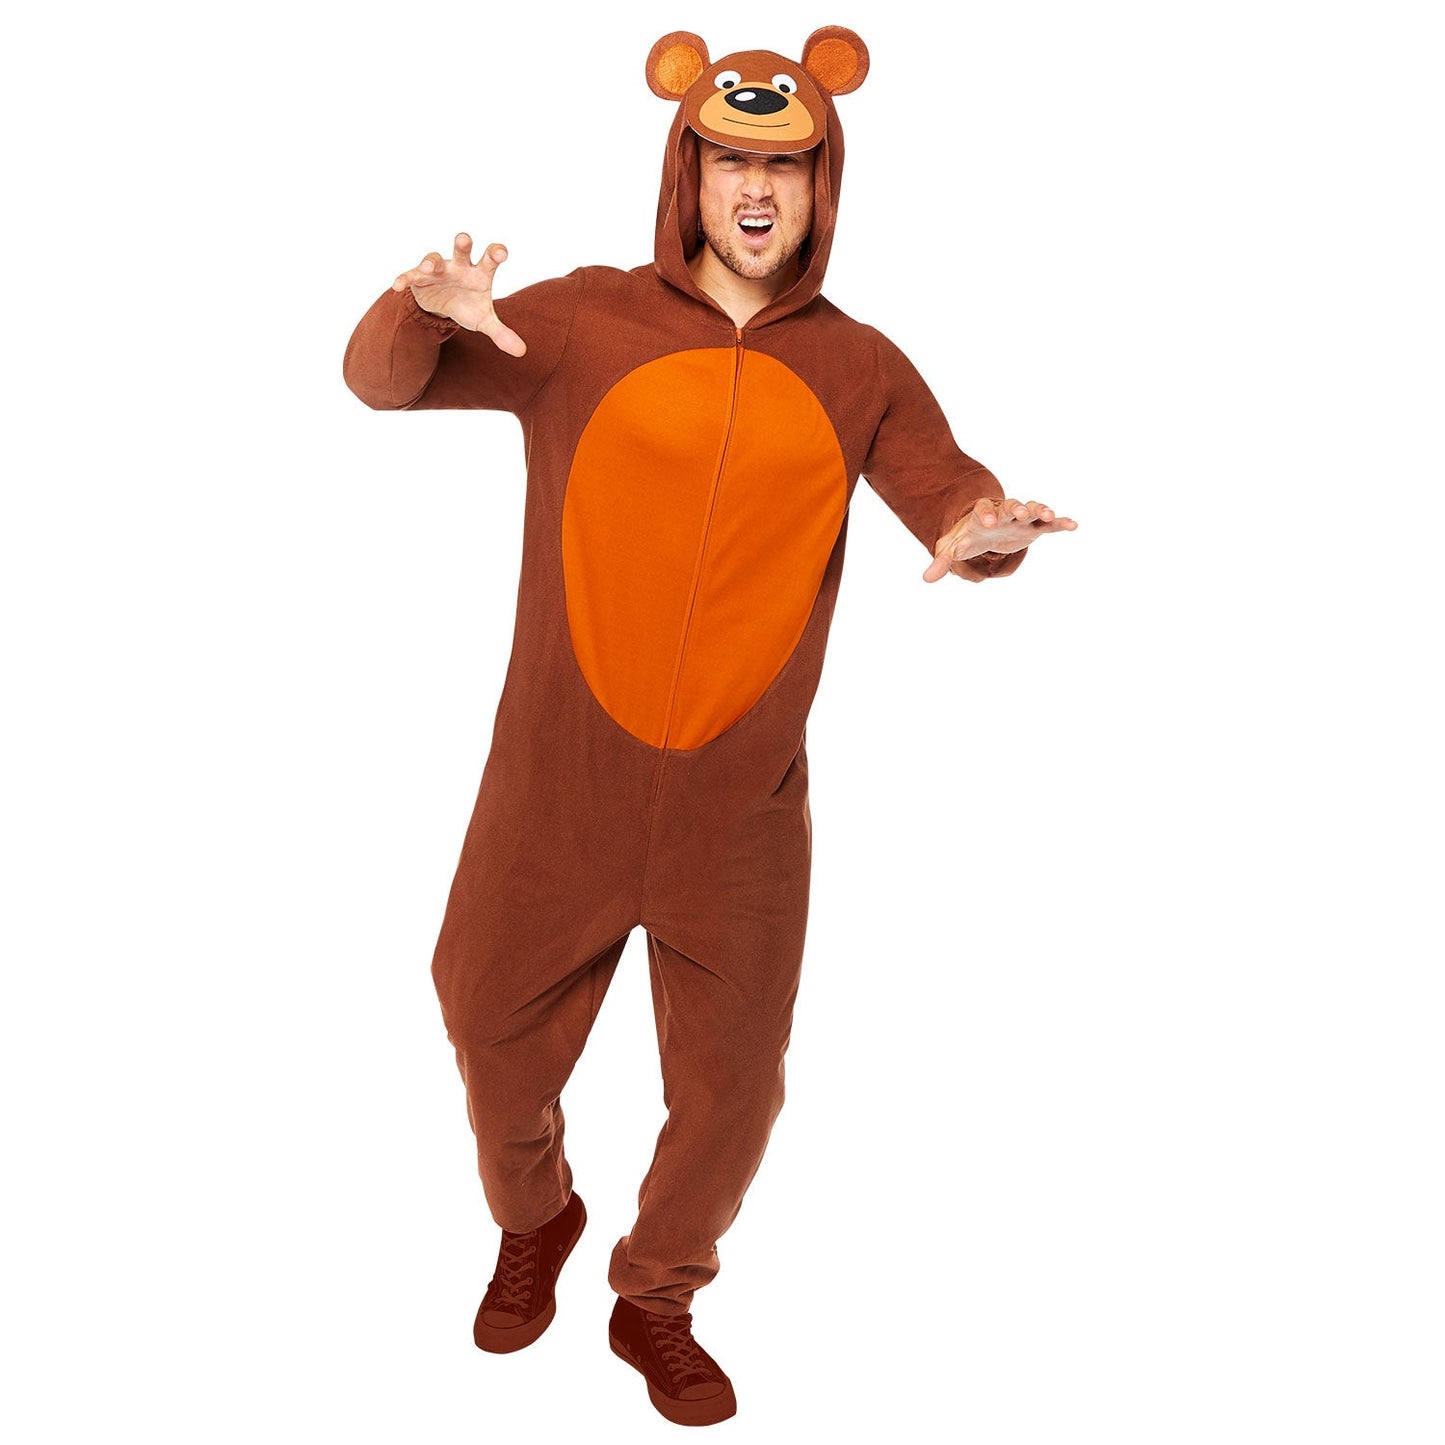 Adult Bear Onesie Costume includes jumpsuit with hood